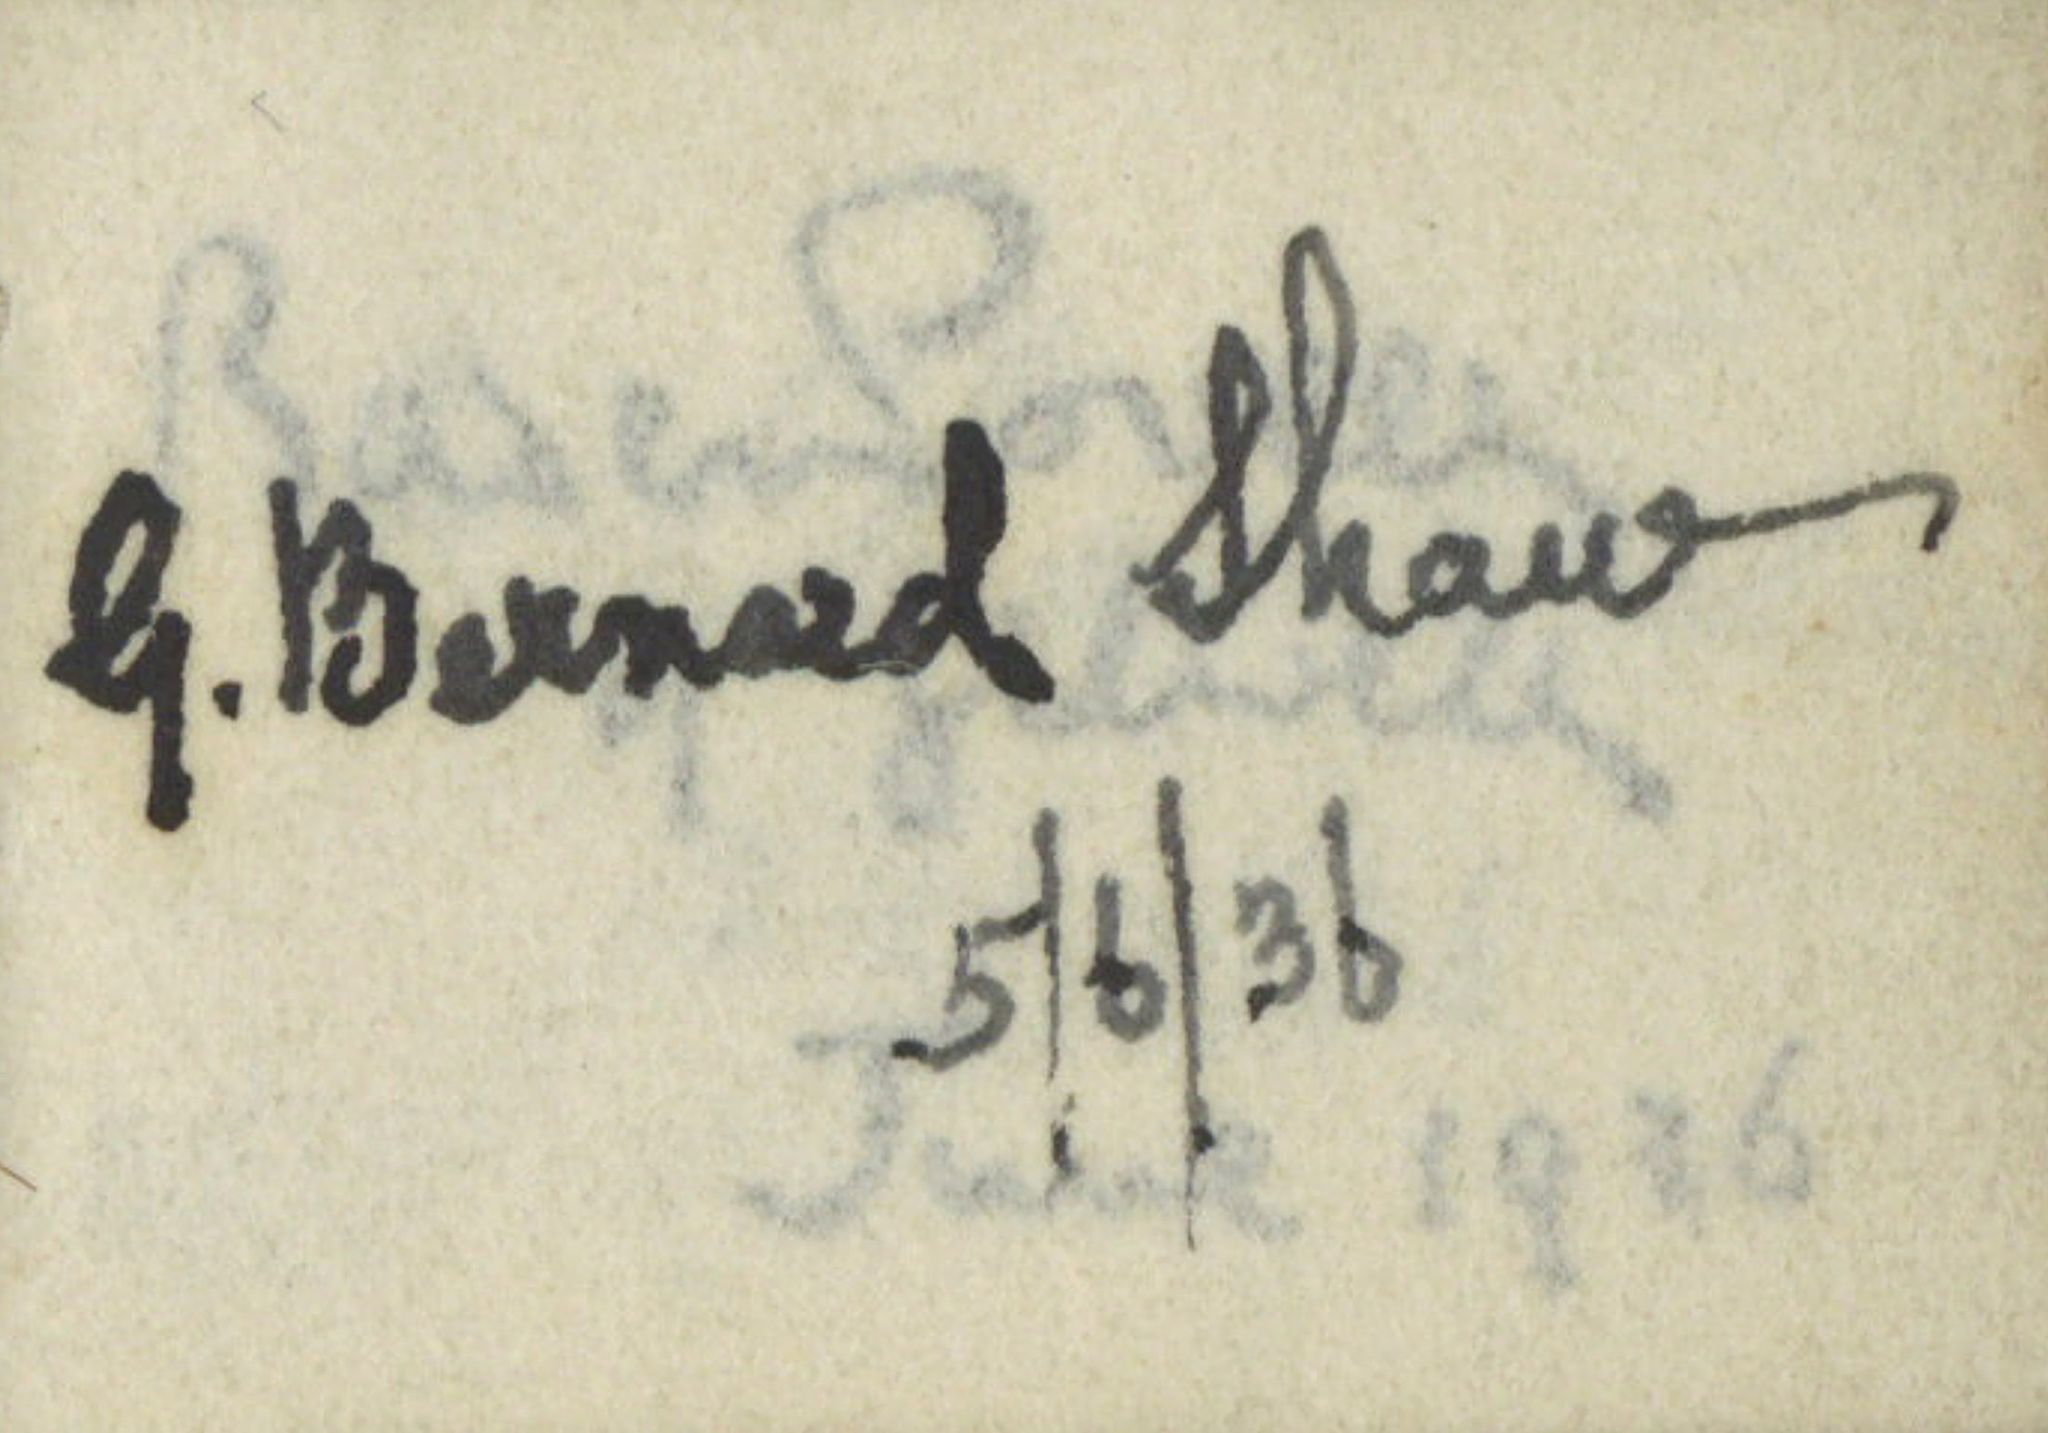 MINIATURE AUTOGRAPH BOOK - CHURCHILL, CHAMBERLAIN - Autograph book containing the signatures of - Image 4 of 4